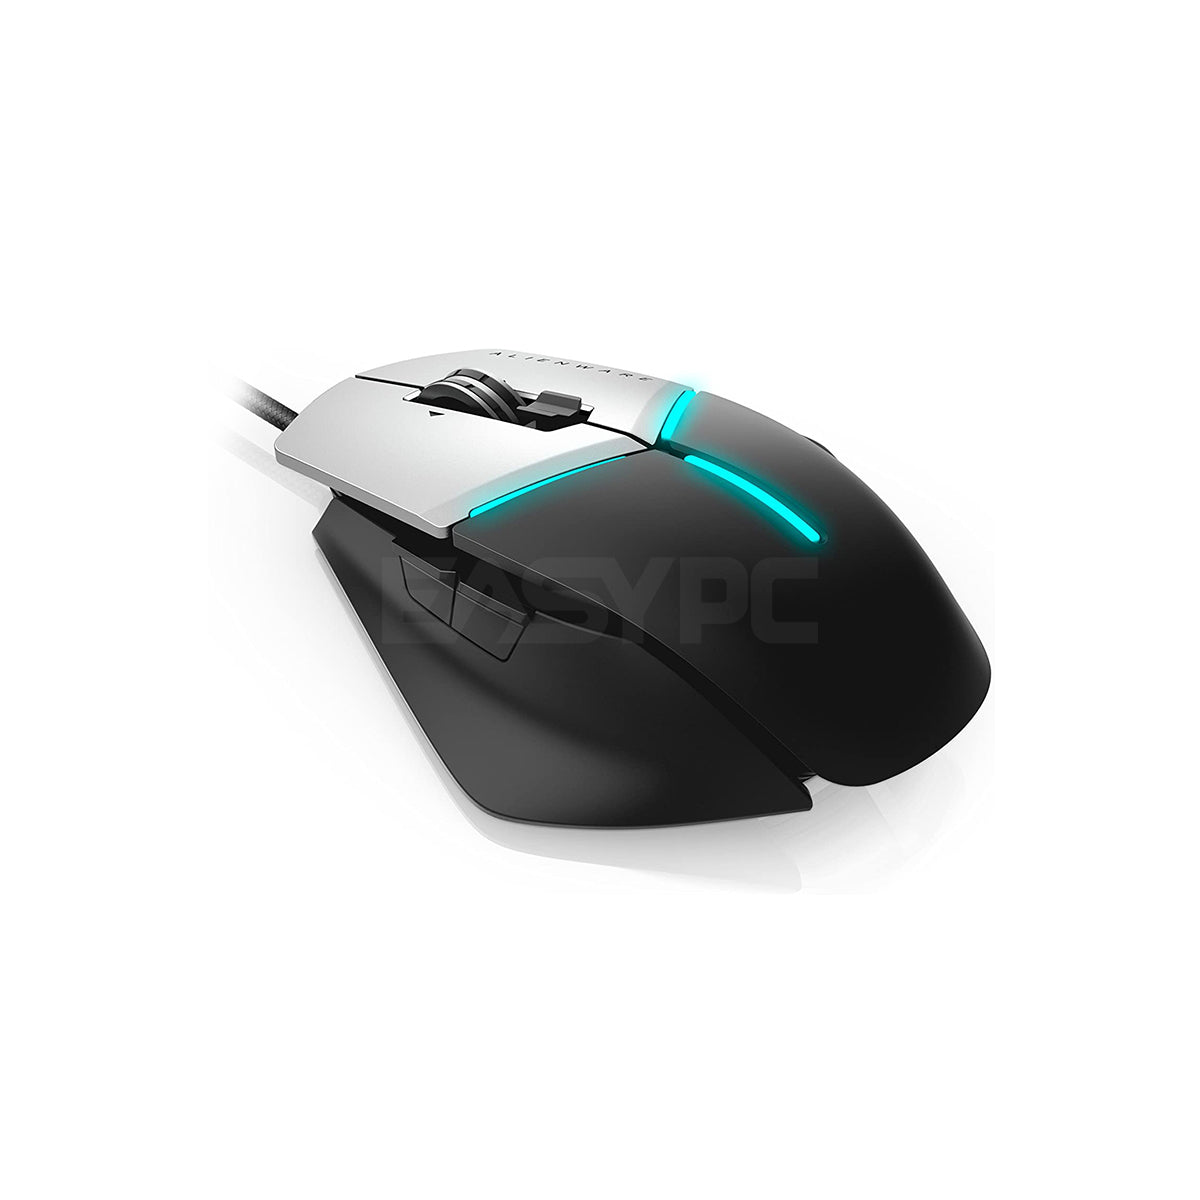 Alienware Elite RGB Gaming Mouse Experience incredible response speed,sensitivity control 100-12000DPI Omron Switch Gaming Mouse AW958 0PHEN ALAW1802